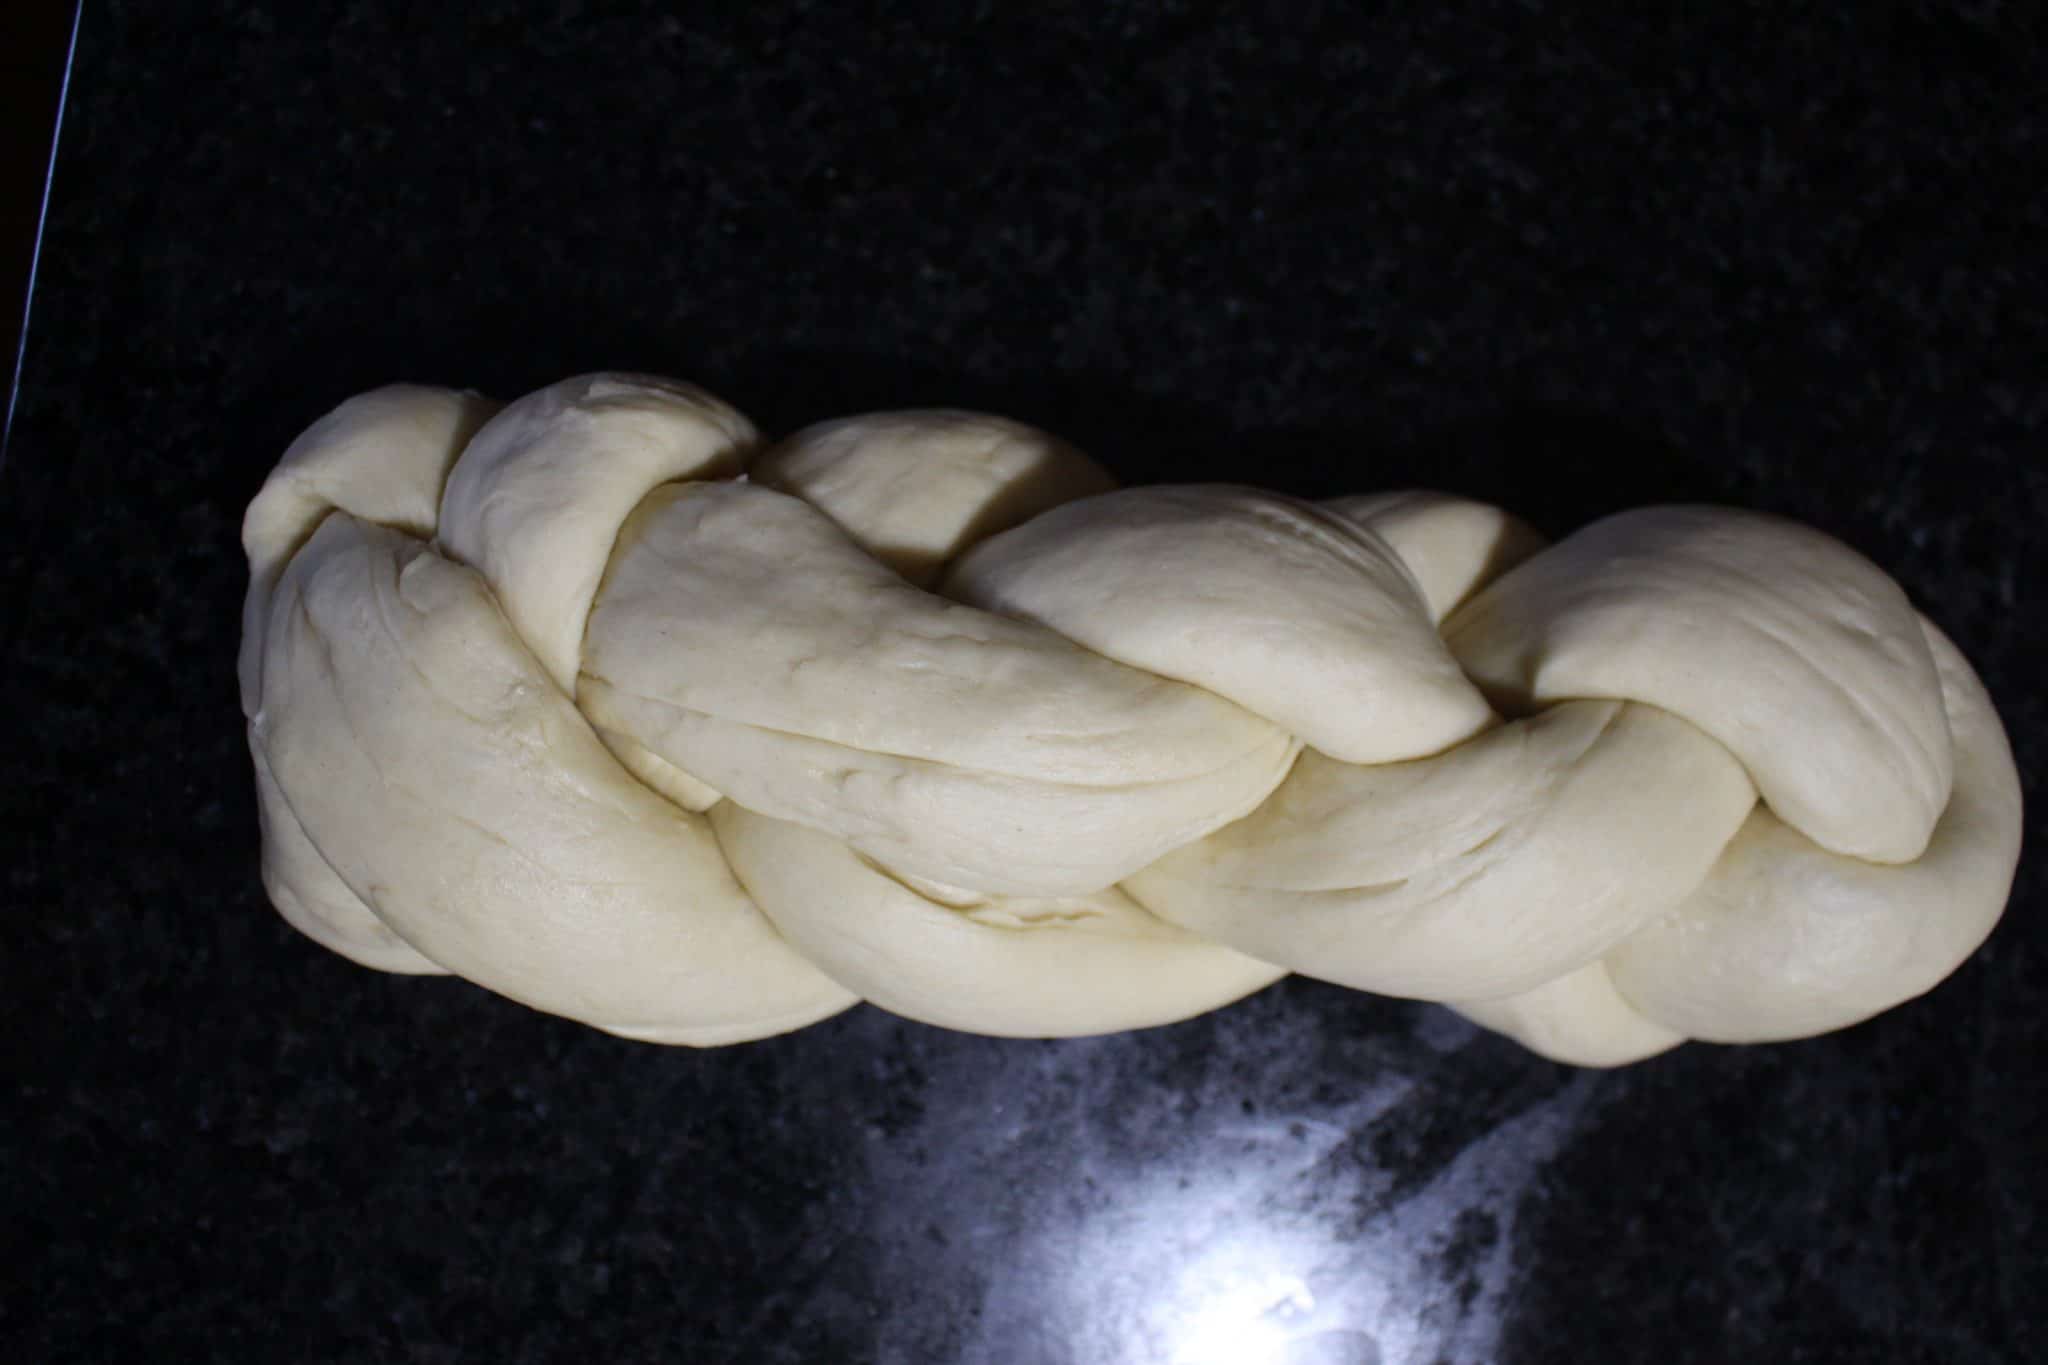 bake the Shaped bread in oven